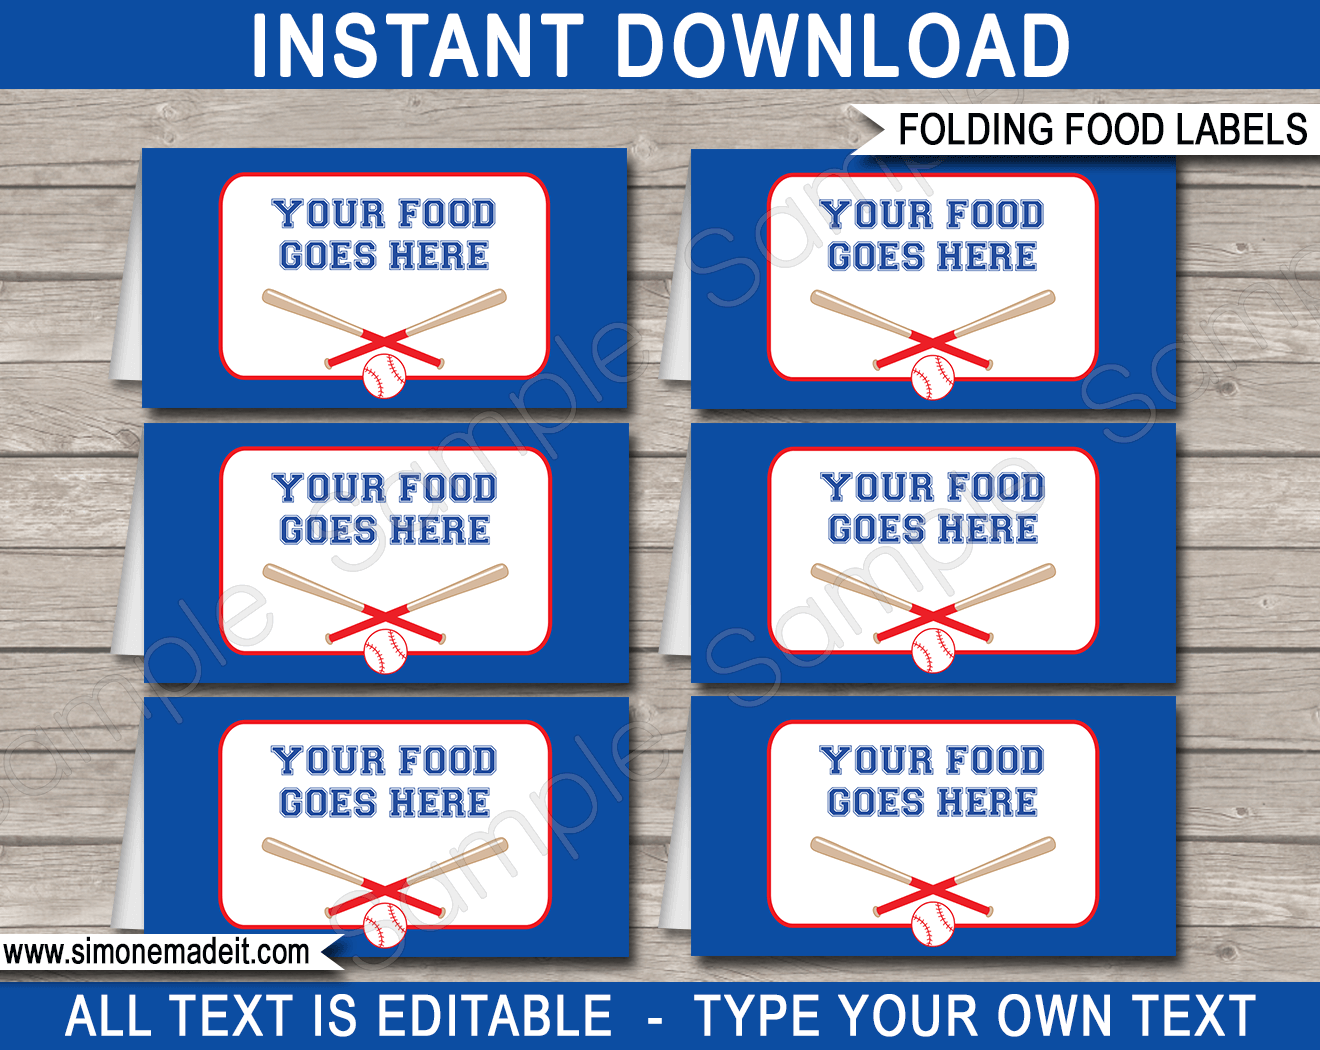 Baseball Party Food Labels | Food Buffet Tags | Place Cards | Birthday Party | Editable DIY Template | $3.00 INSTANT DOWNLOAD via SIMONEmadeit.com